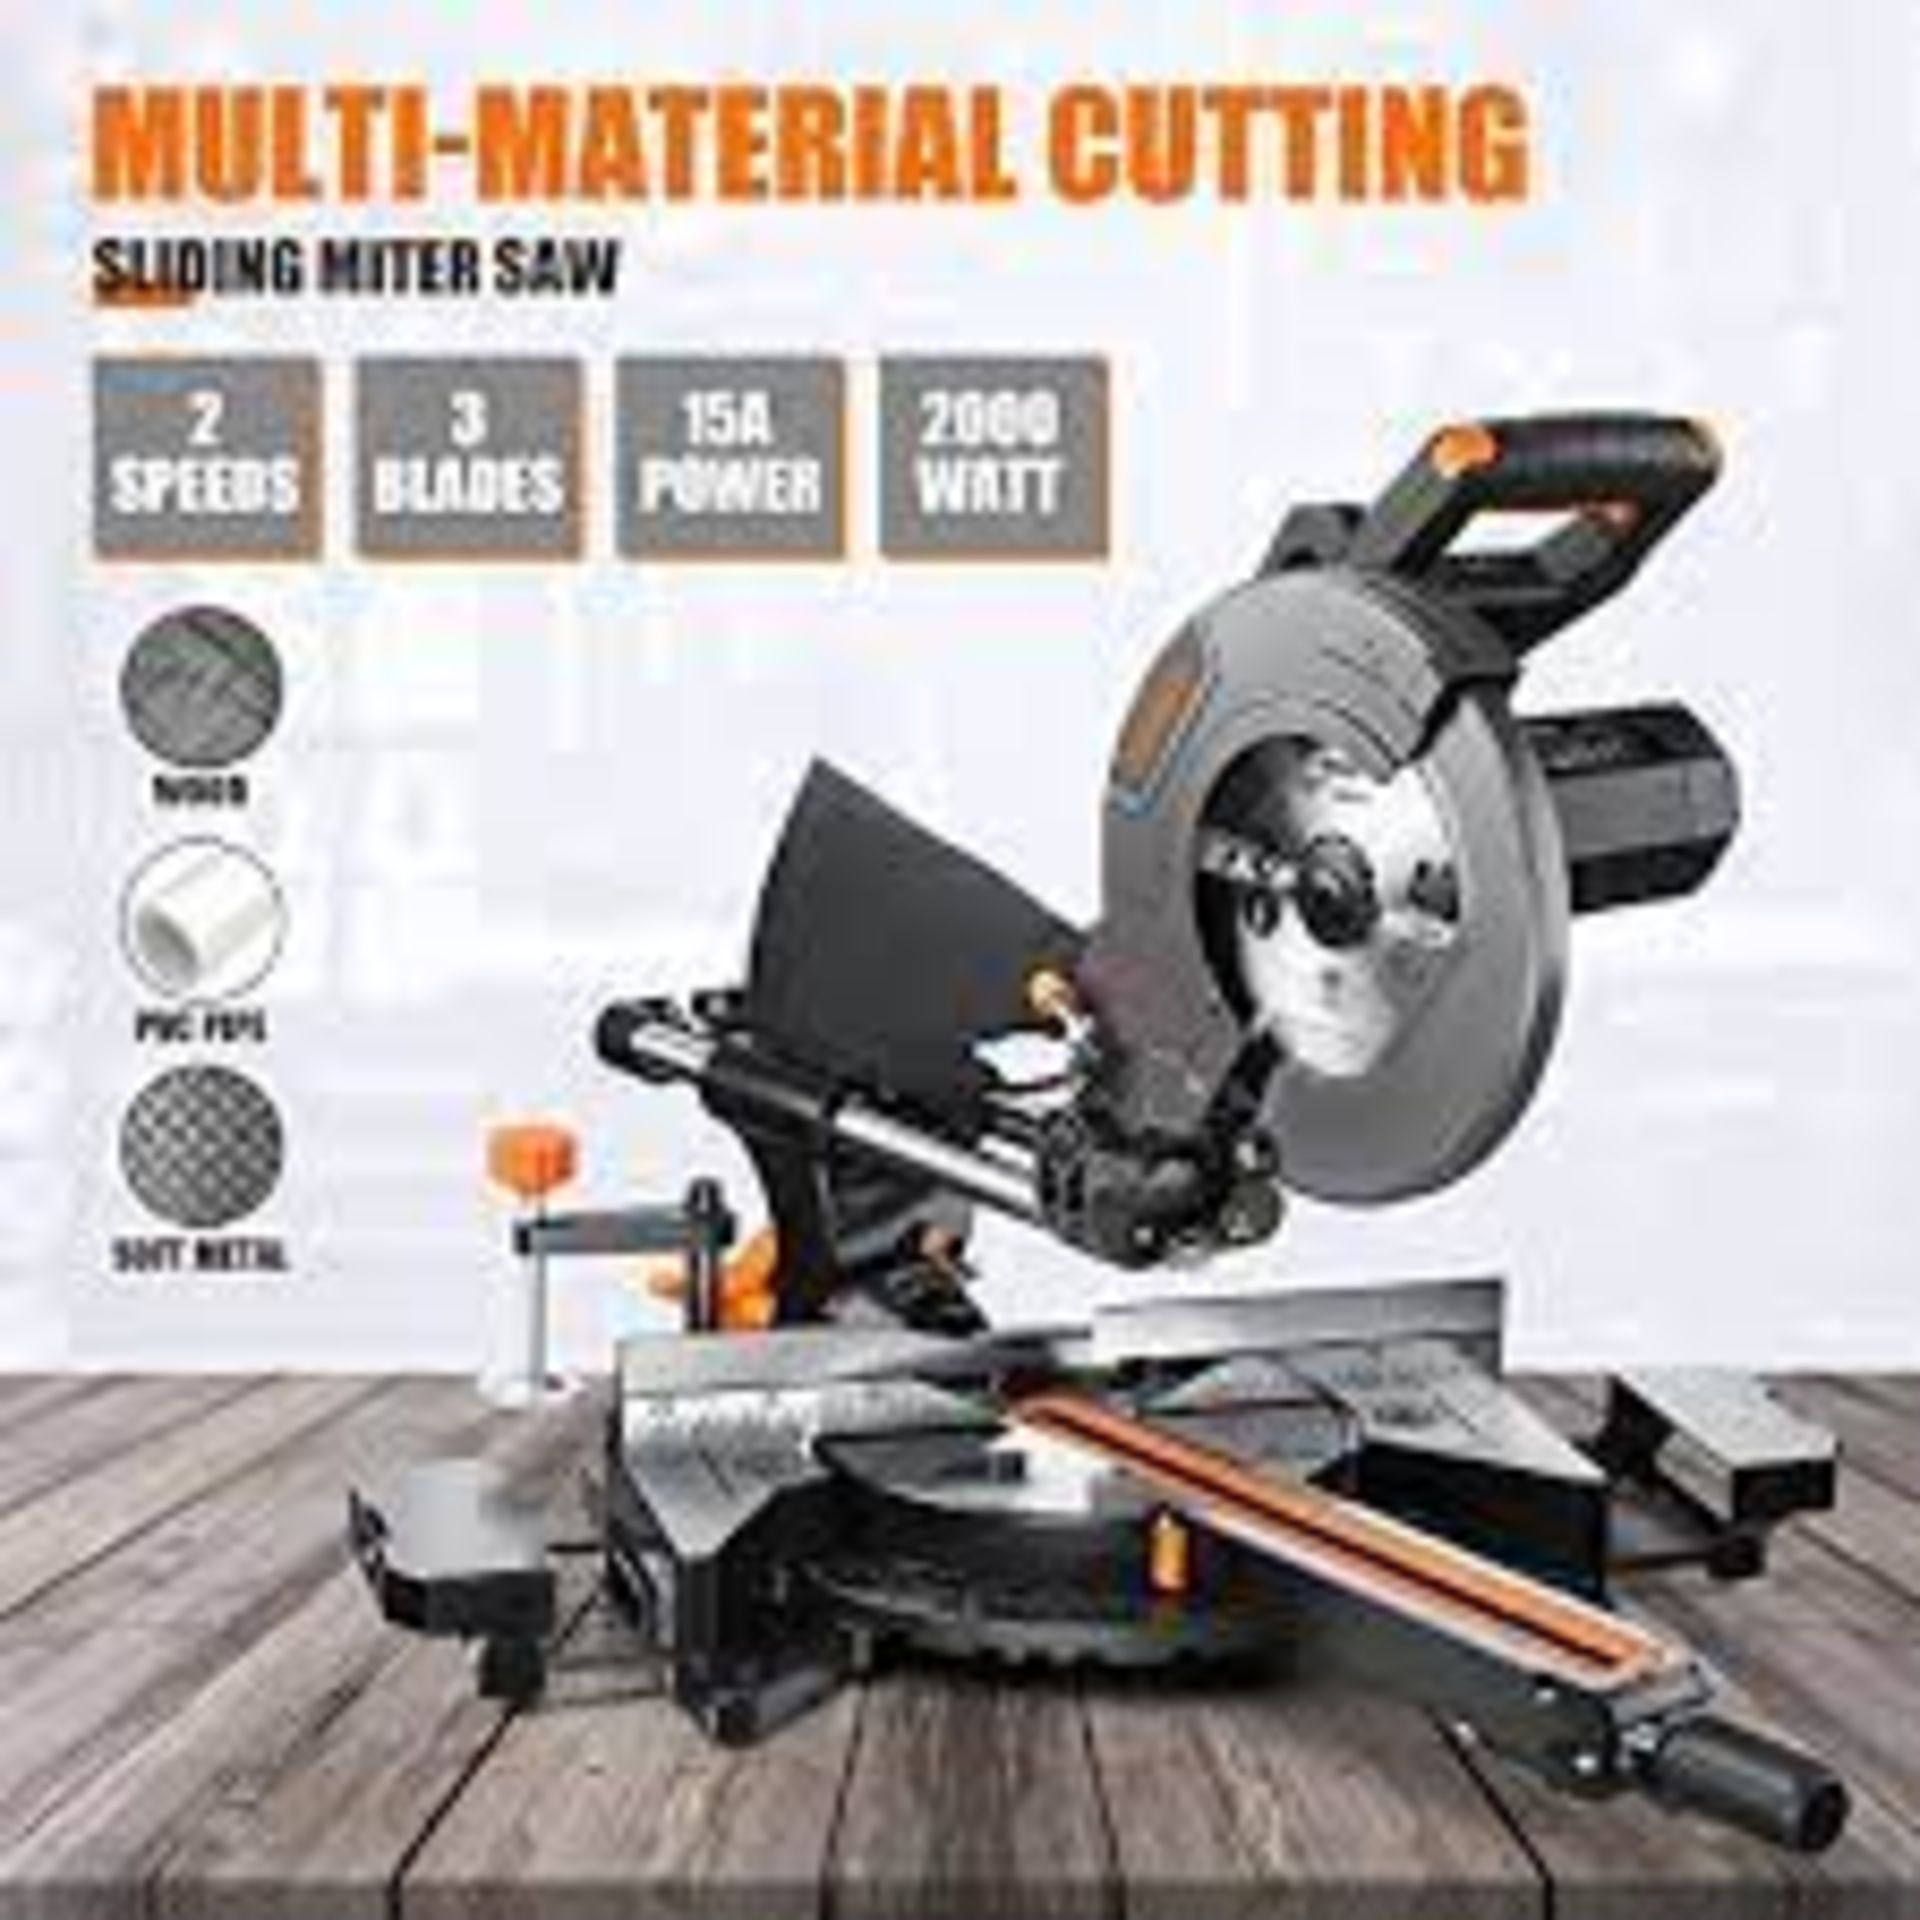 PALLET TO CONTAIN 3 x NEW BOXED ENGiNDOT Sliding Mitre Saw, 10-Inch Single Bevel Compound Miter